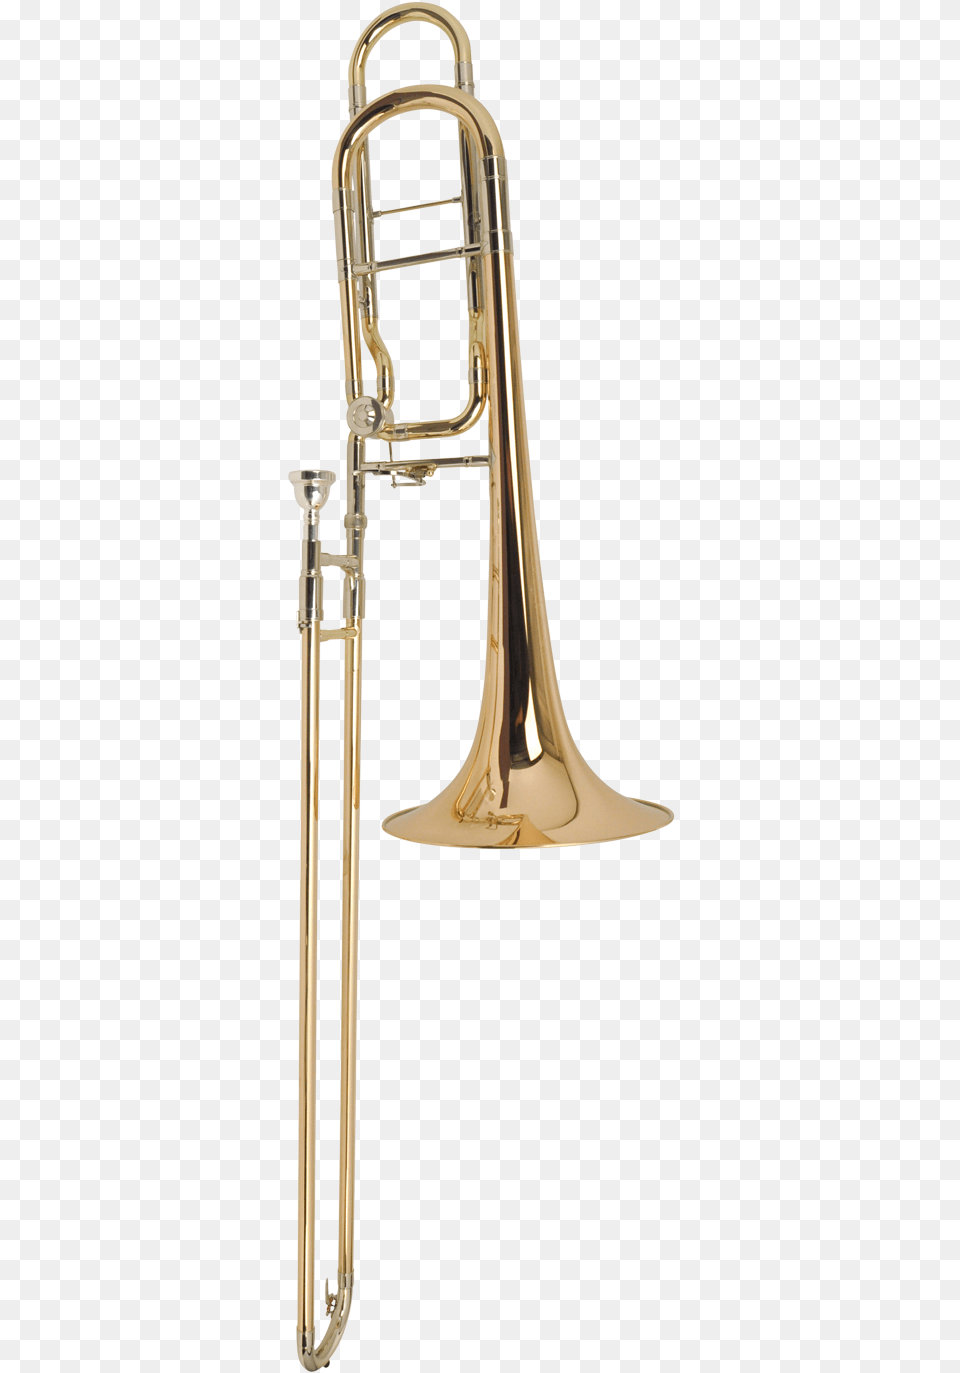 Types Of Trombone, Musical Instrument, Brass Section Png